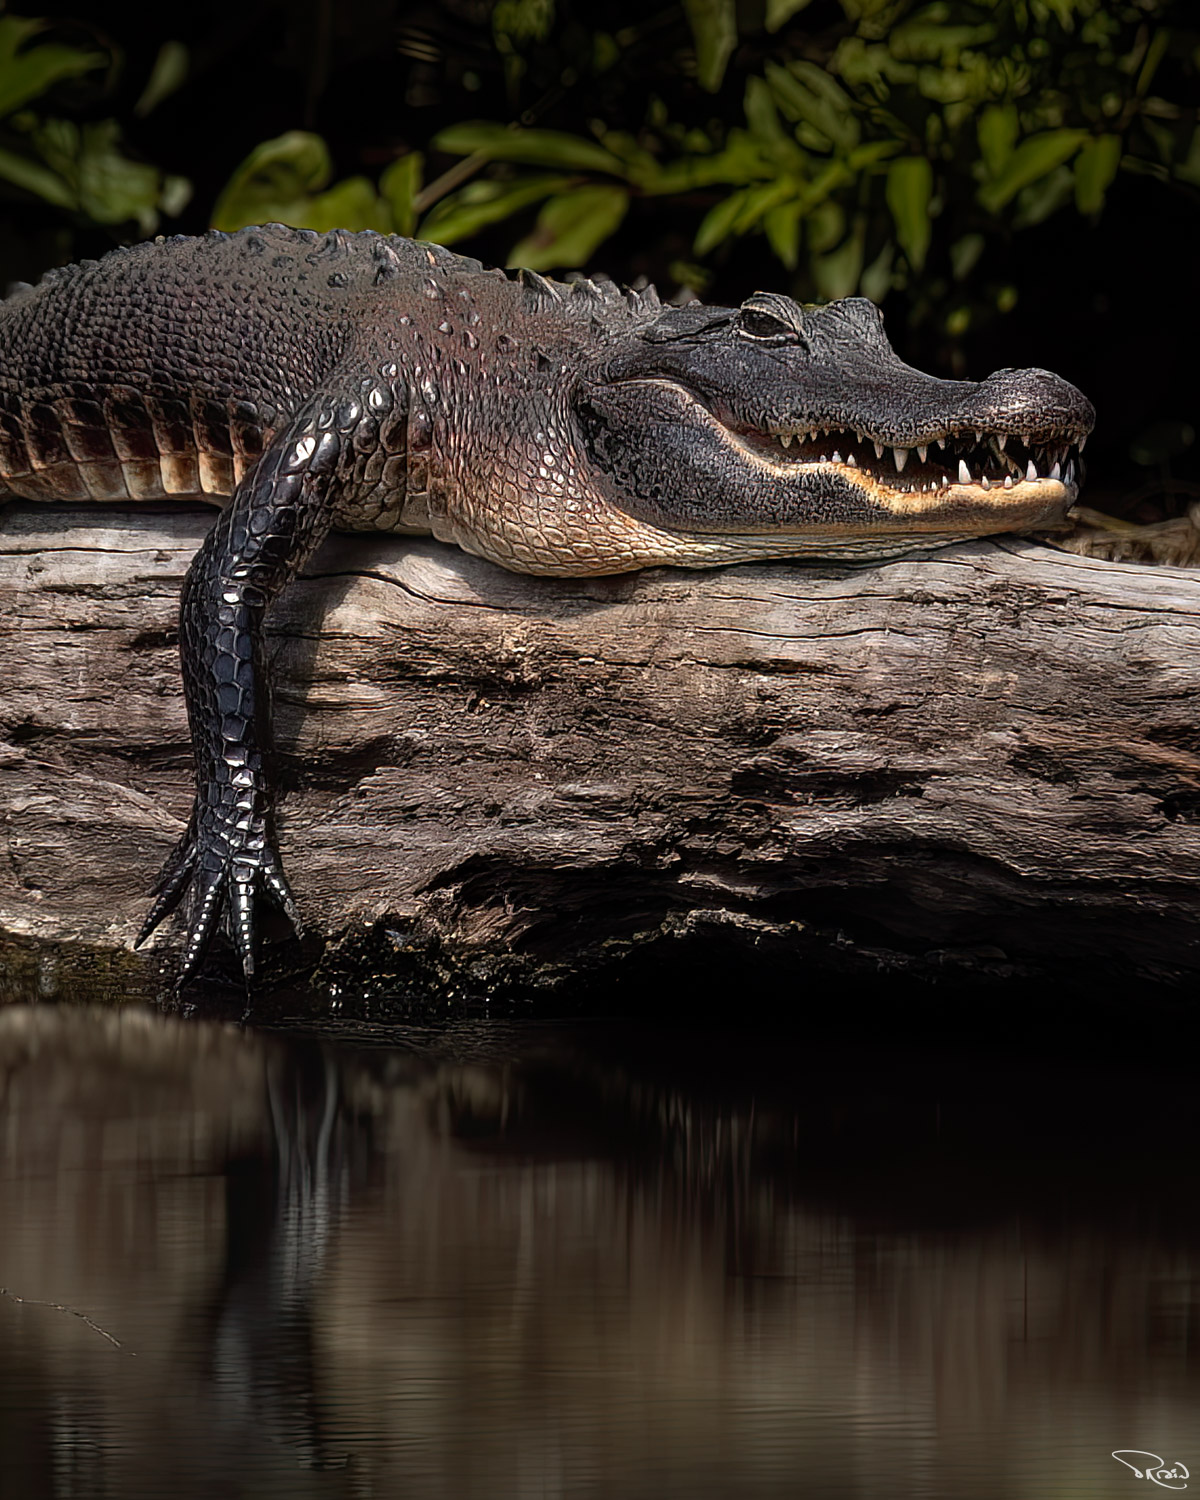 An alligator shows off its pearly white grin while draping itself over a log on the river.